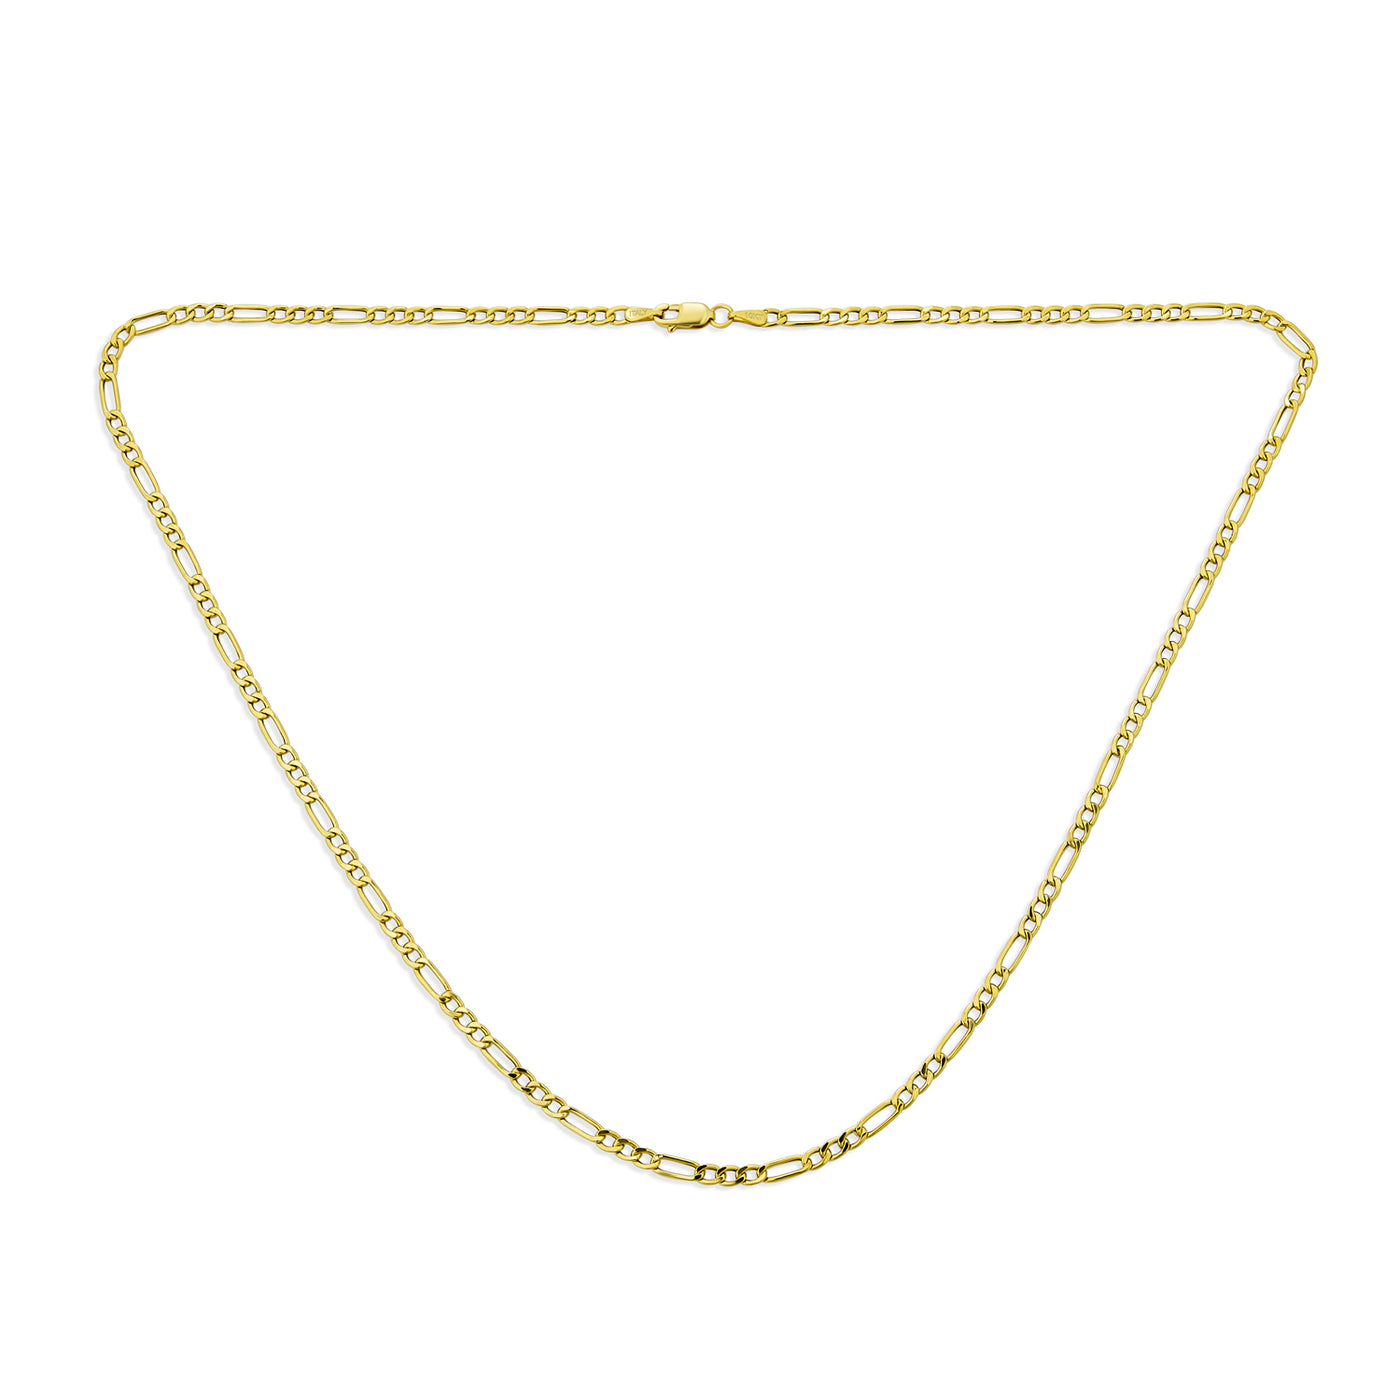 Unisex Thin 2MM Solid Yellow 10K Gold Figaro Chain Necklace 16-24"